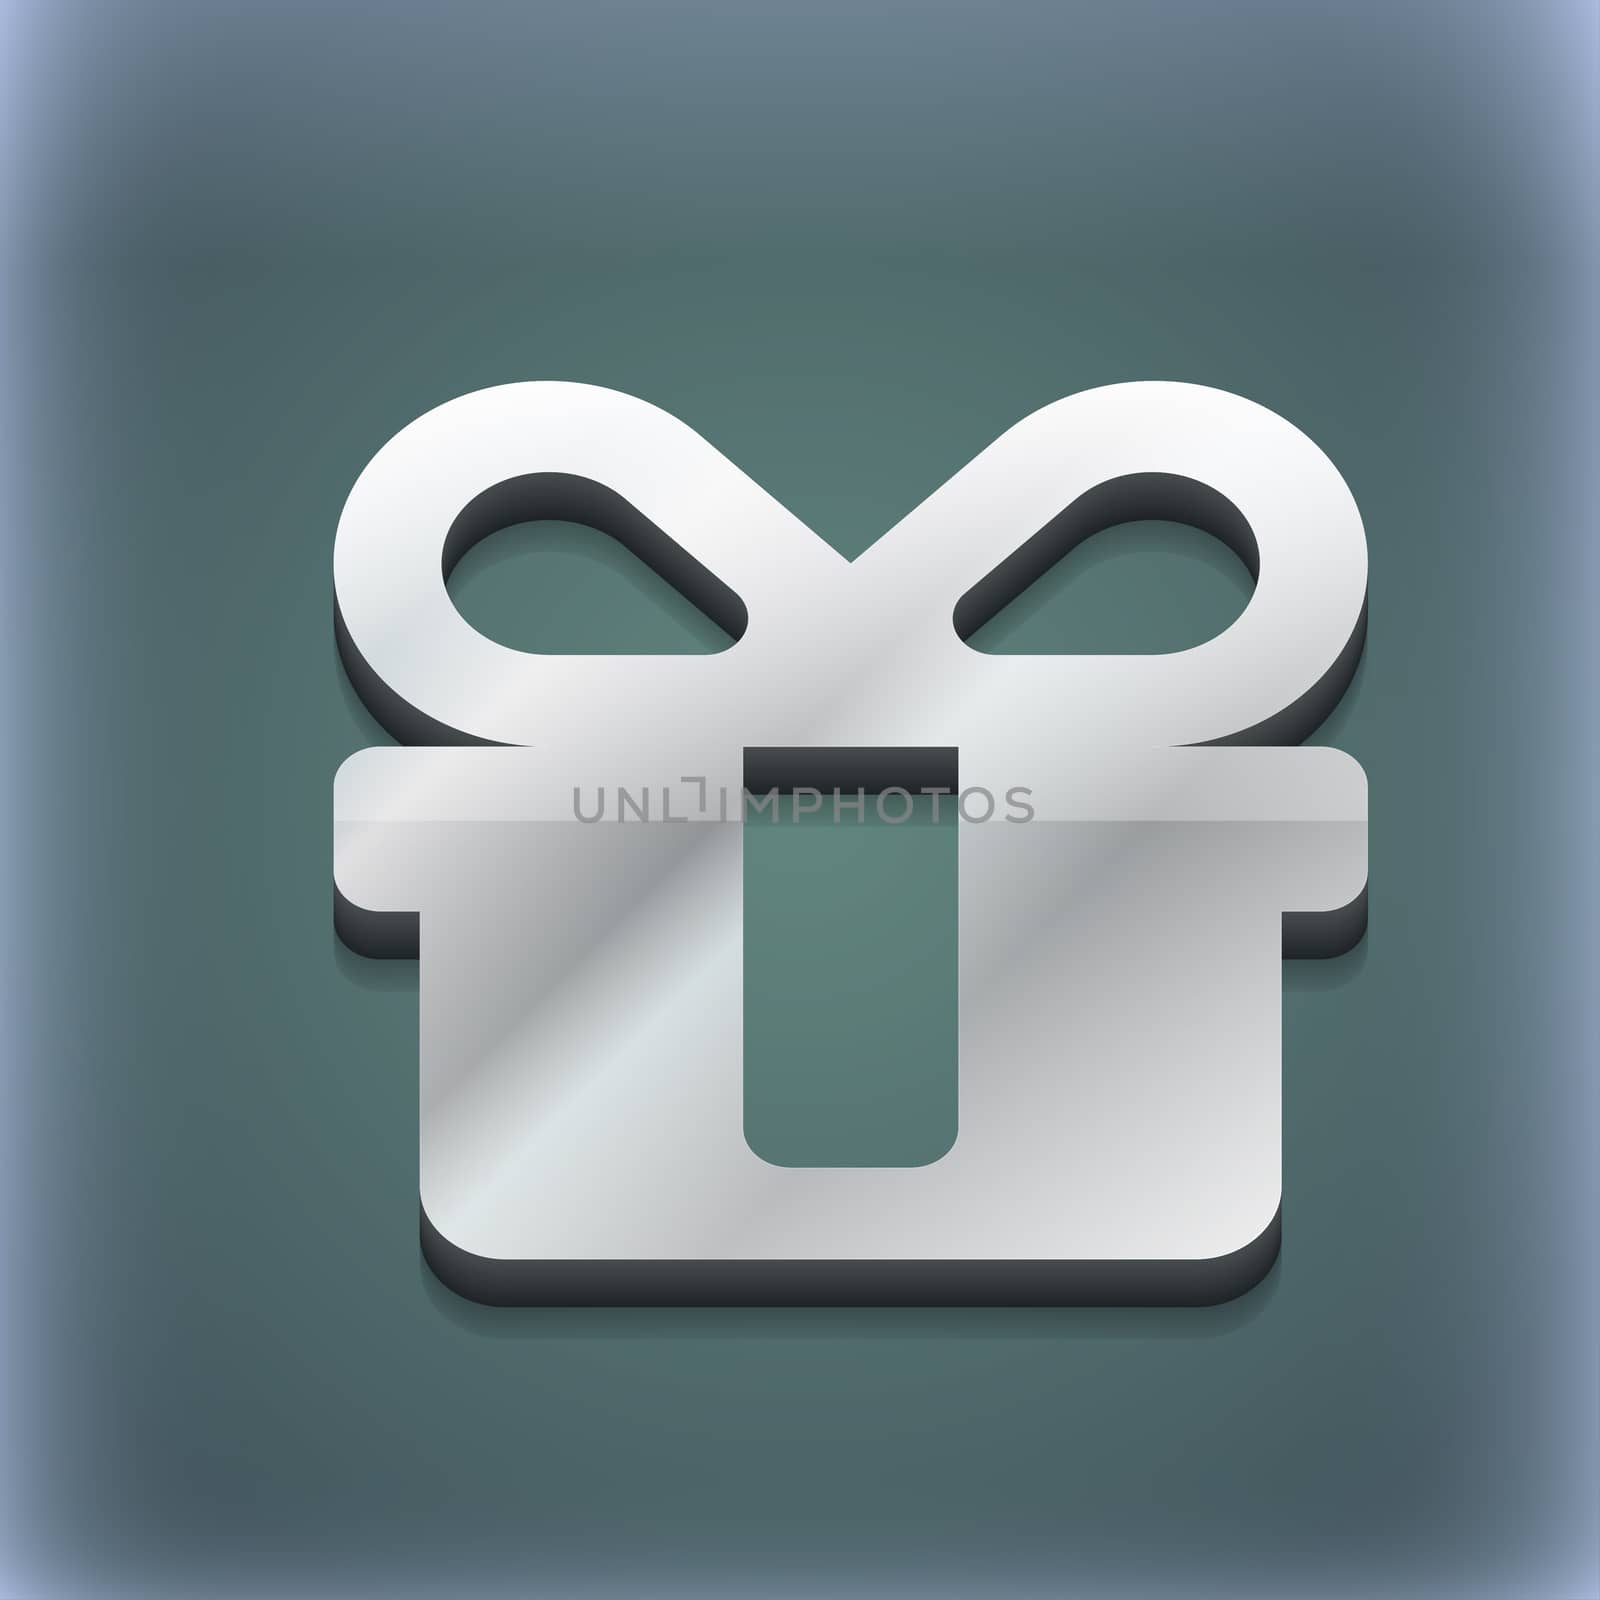 gift icon symbol. 3D style. Trendy, modern design with space for your text illustration. Raster version